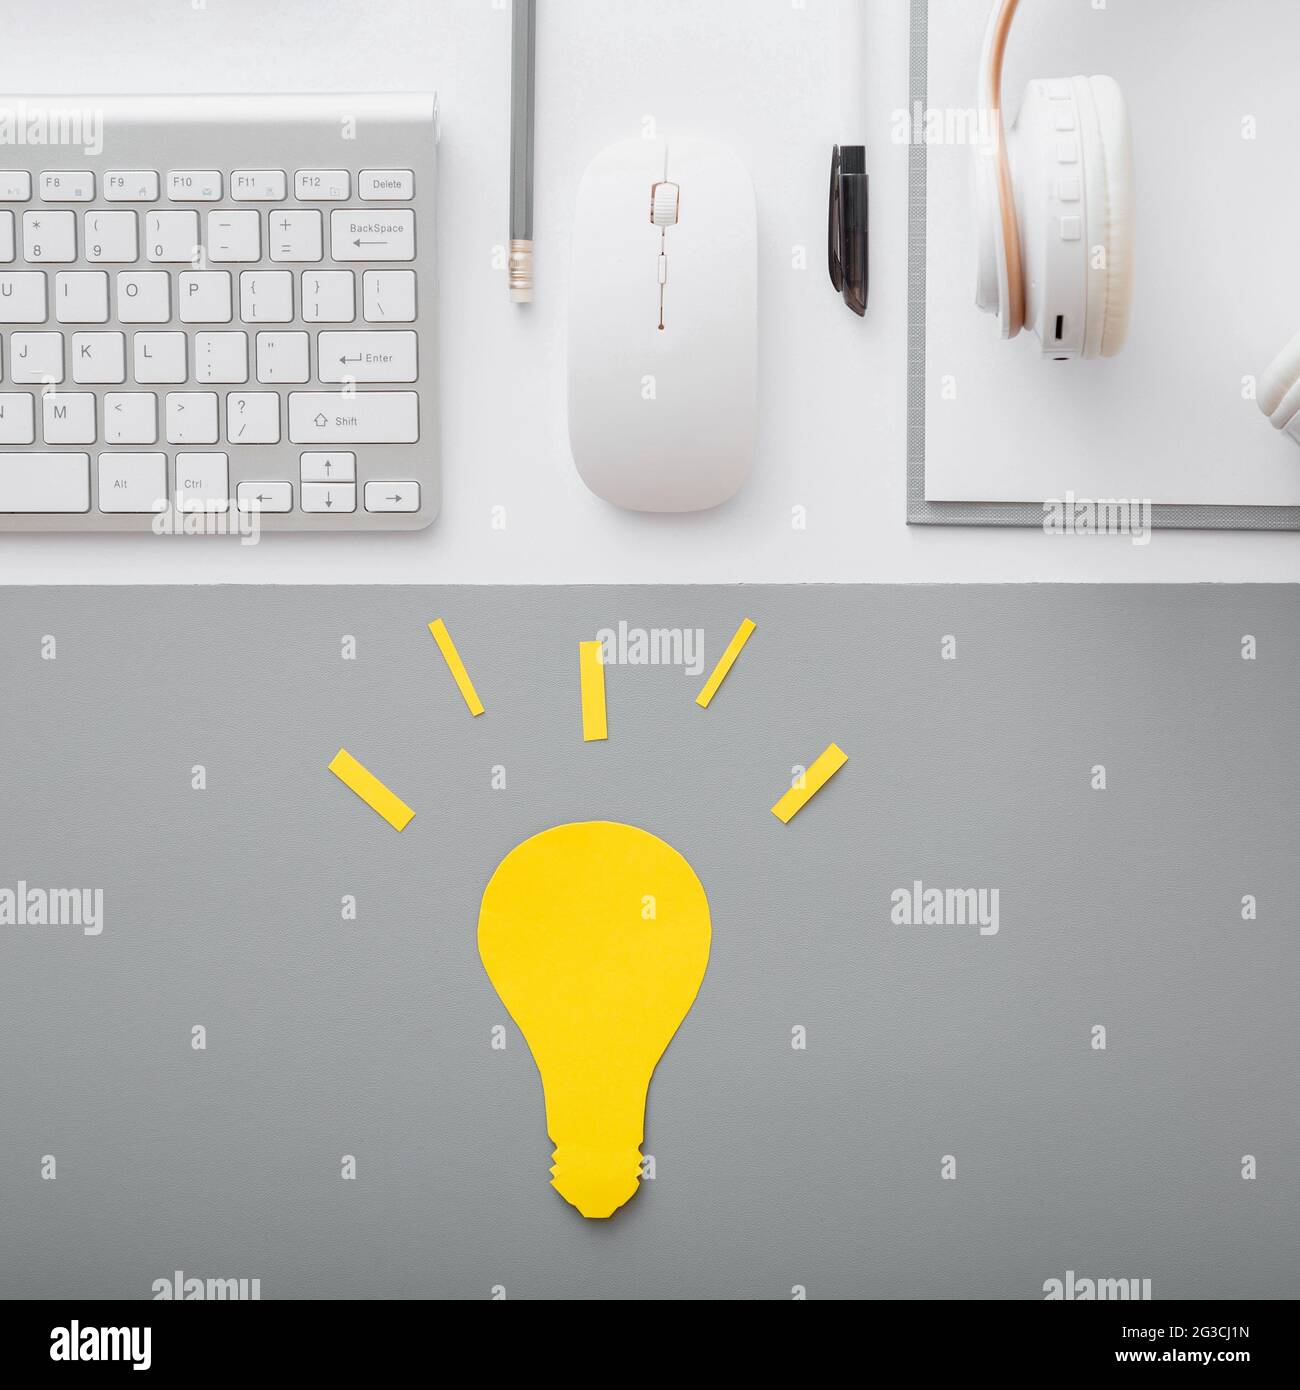 Yellow light bulb idea insight concept on student desktop with keyboard pc computer mouse headphones and white suppliers in workspace on gray table Stock Photo